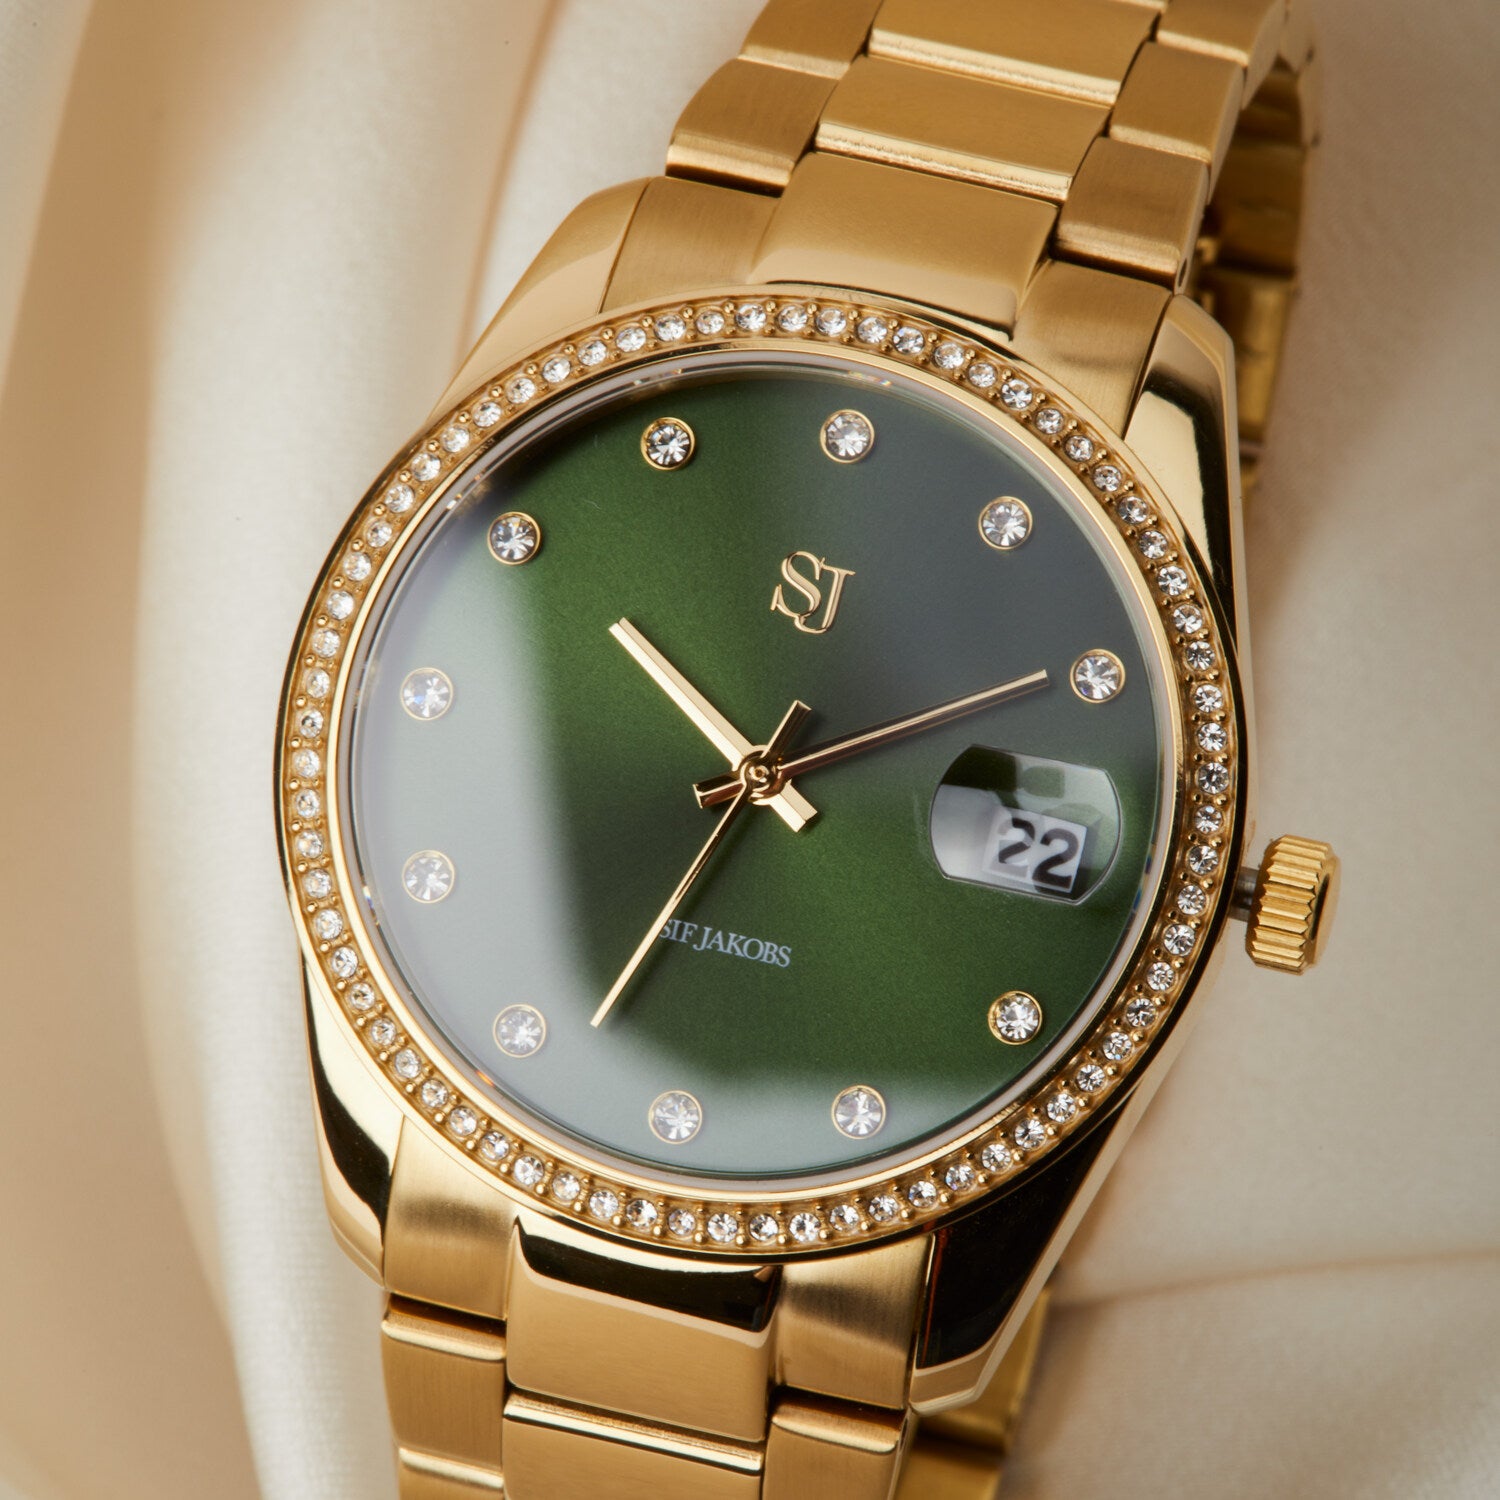 Stainless steel gold | Green dial